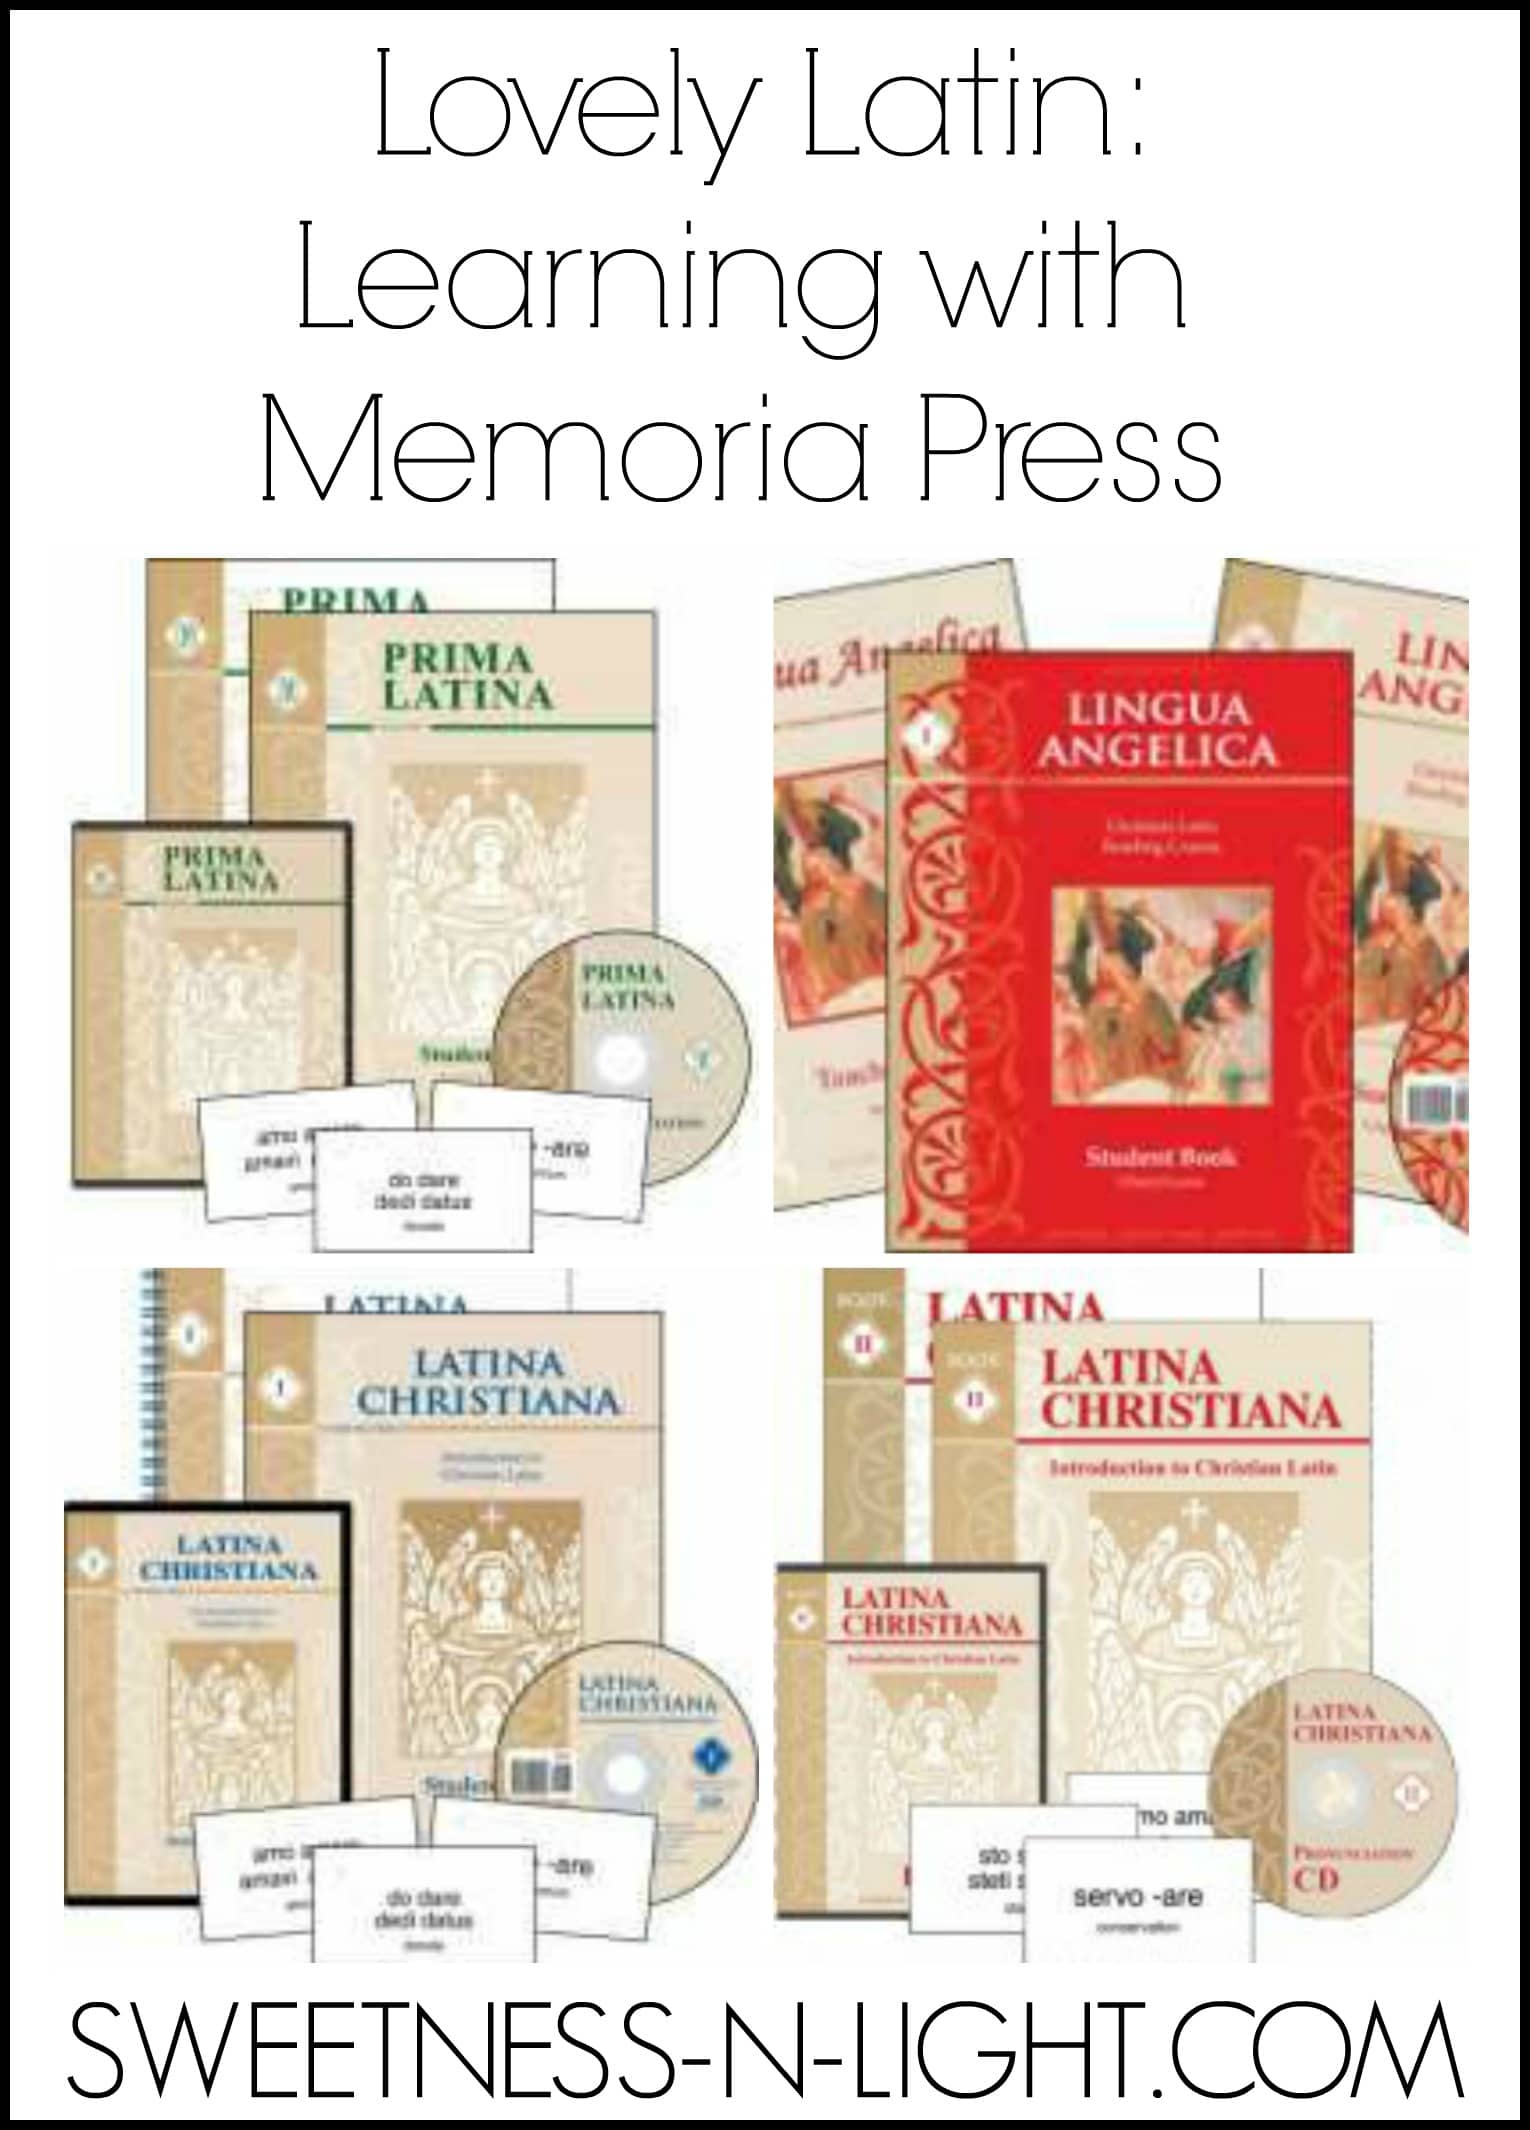 Lovely Latin: Learning with Memoria Press